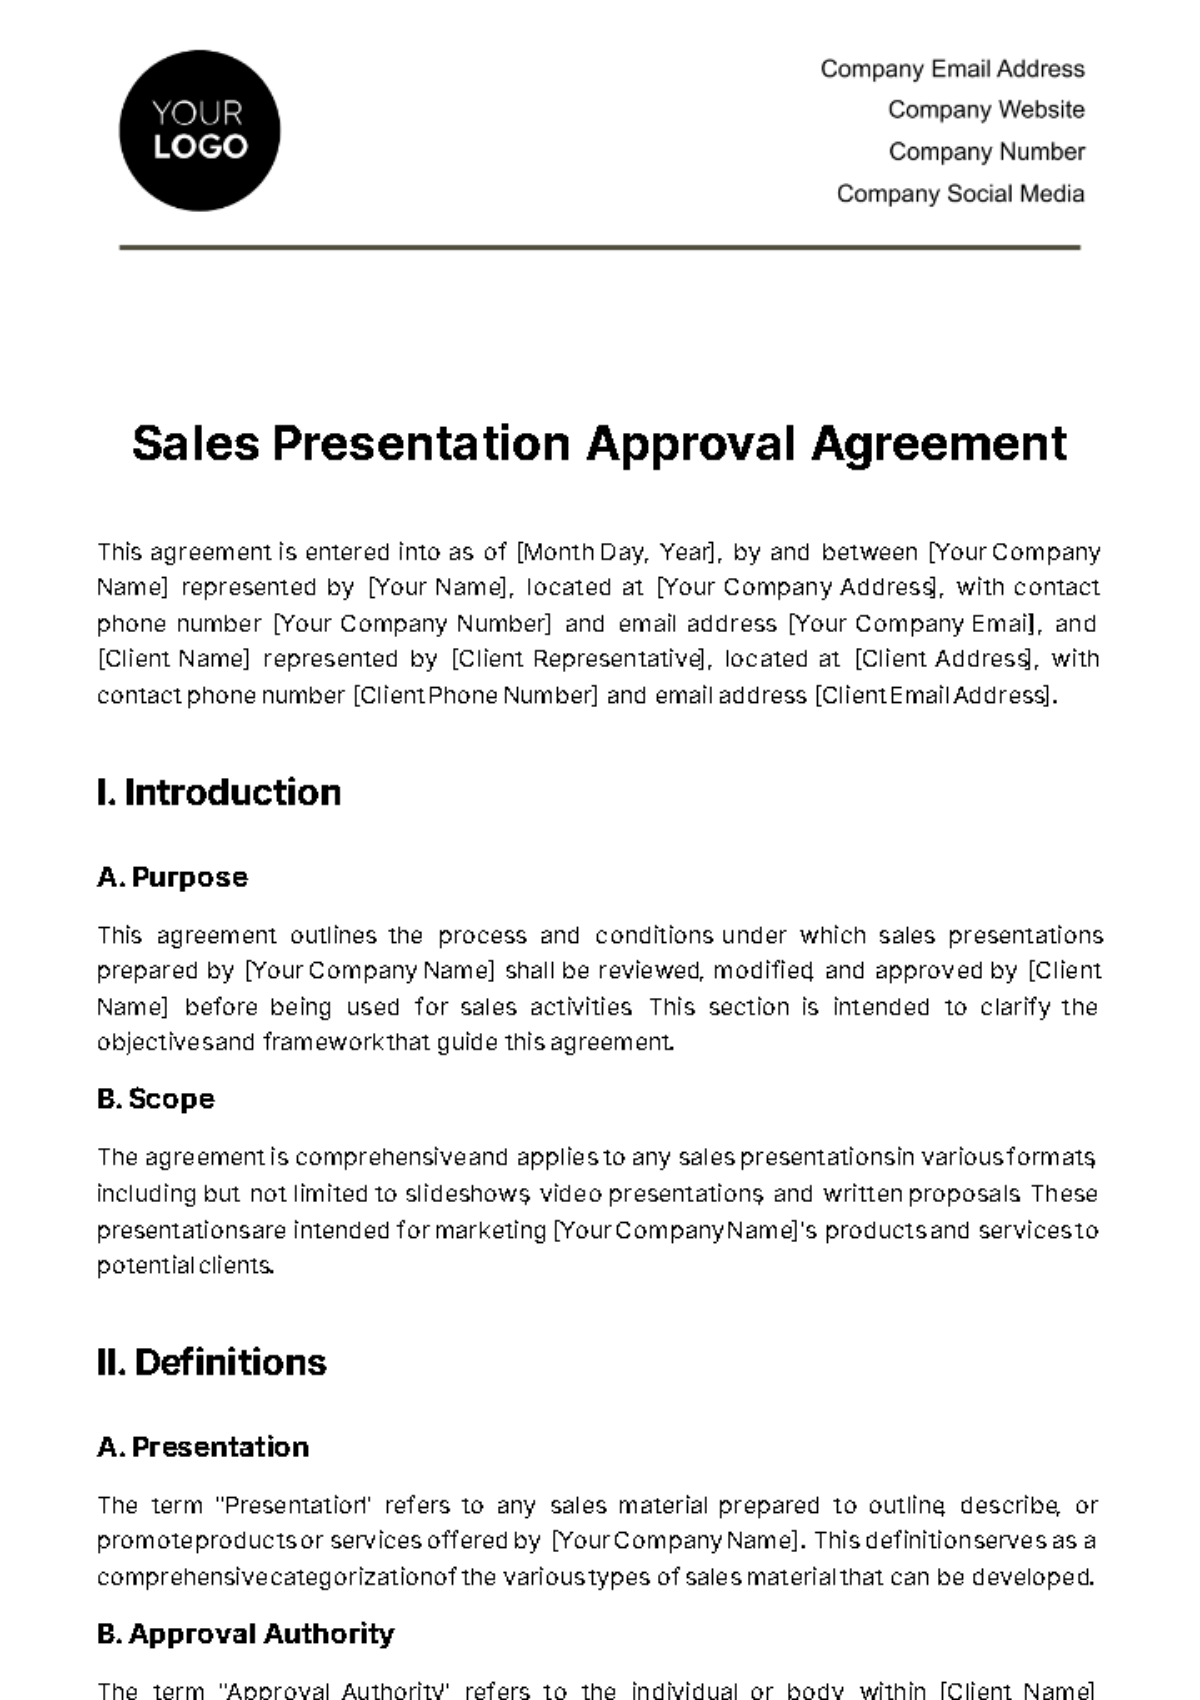 Sales Presentation Approval Agreement Template